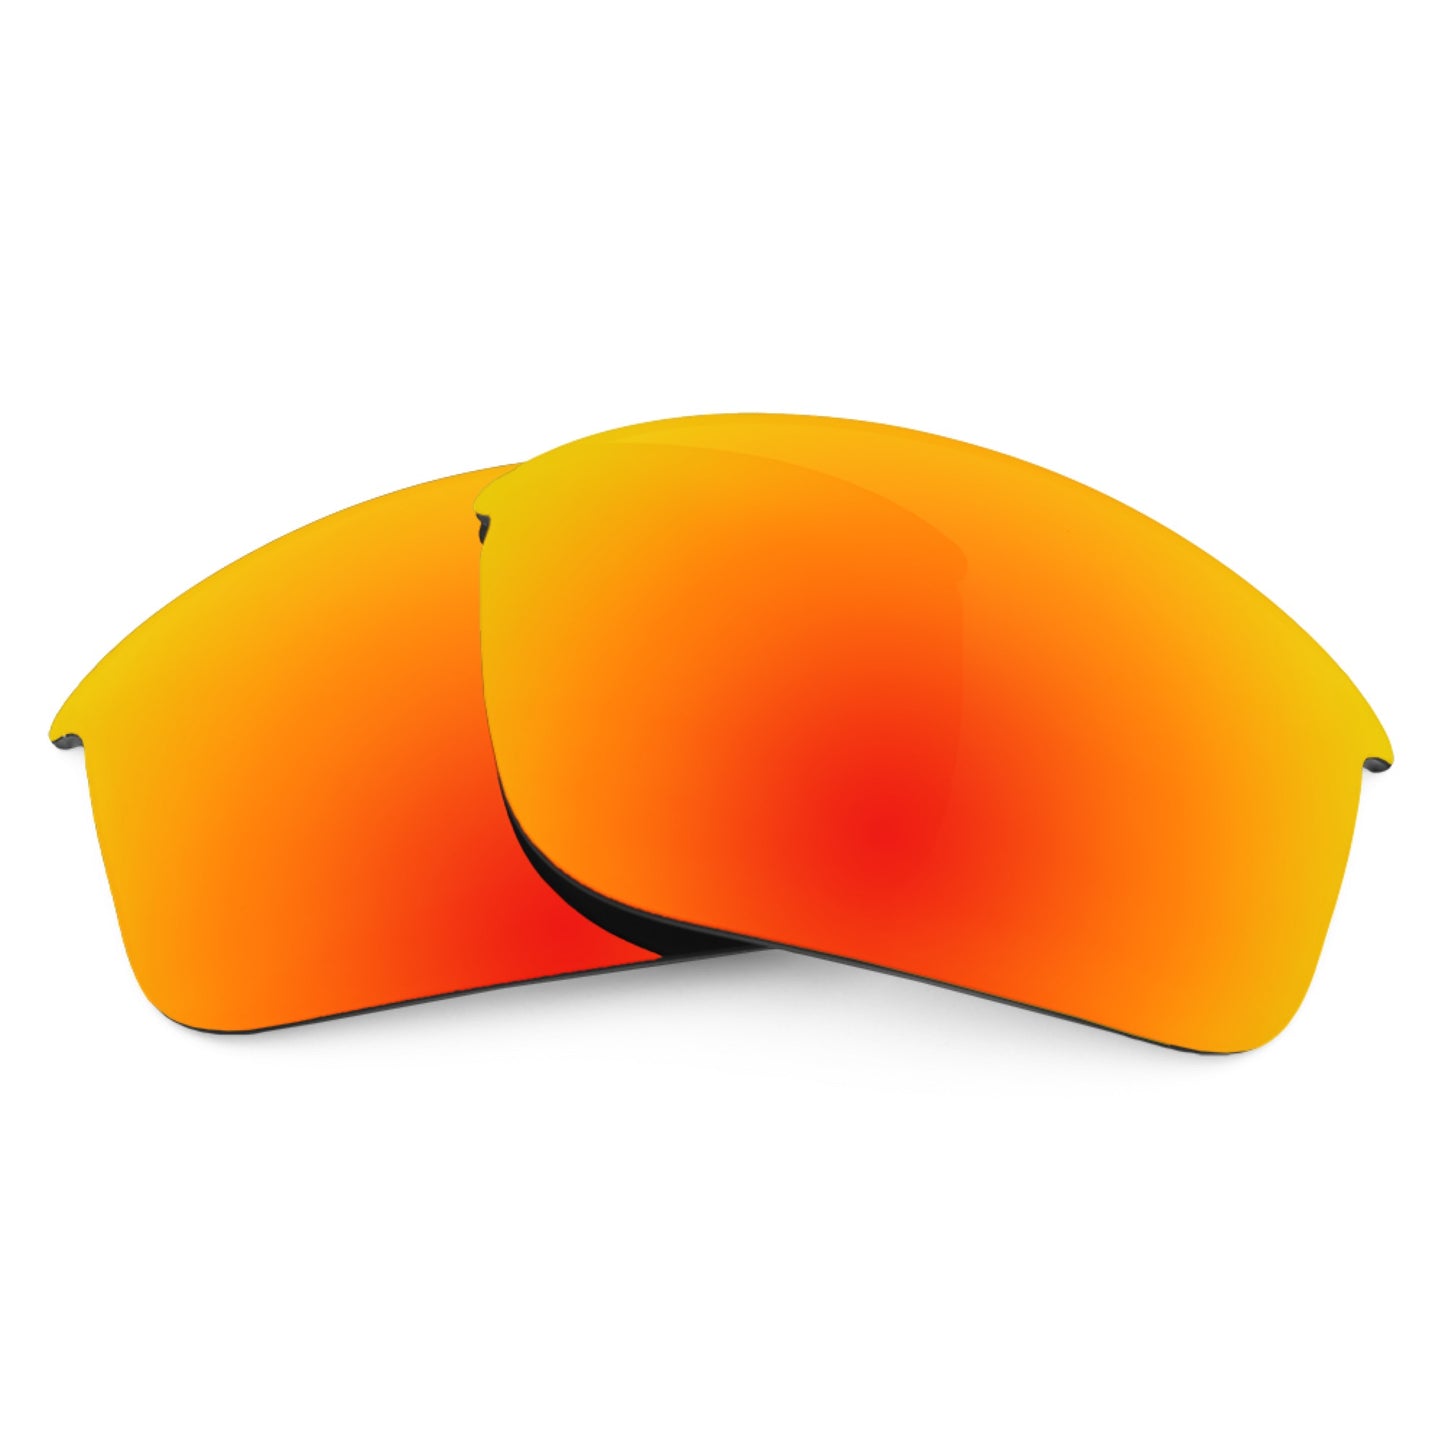 Revant replacement lenses for Nike Show X3 Polarized Fire Red